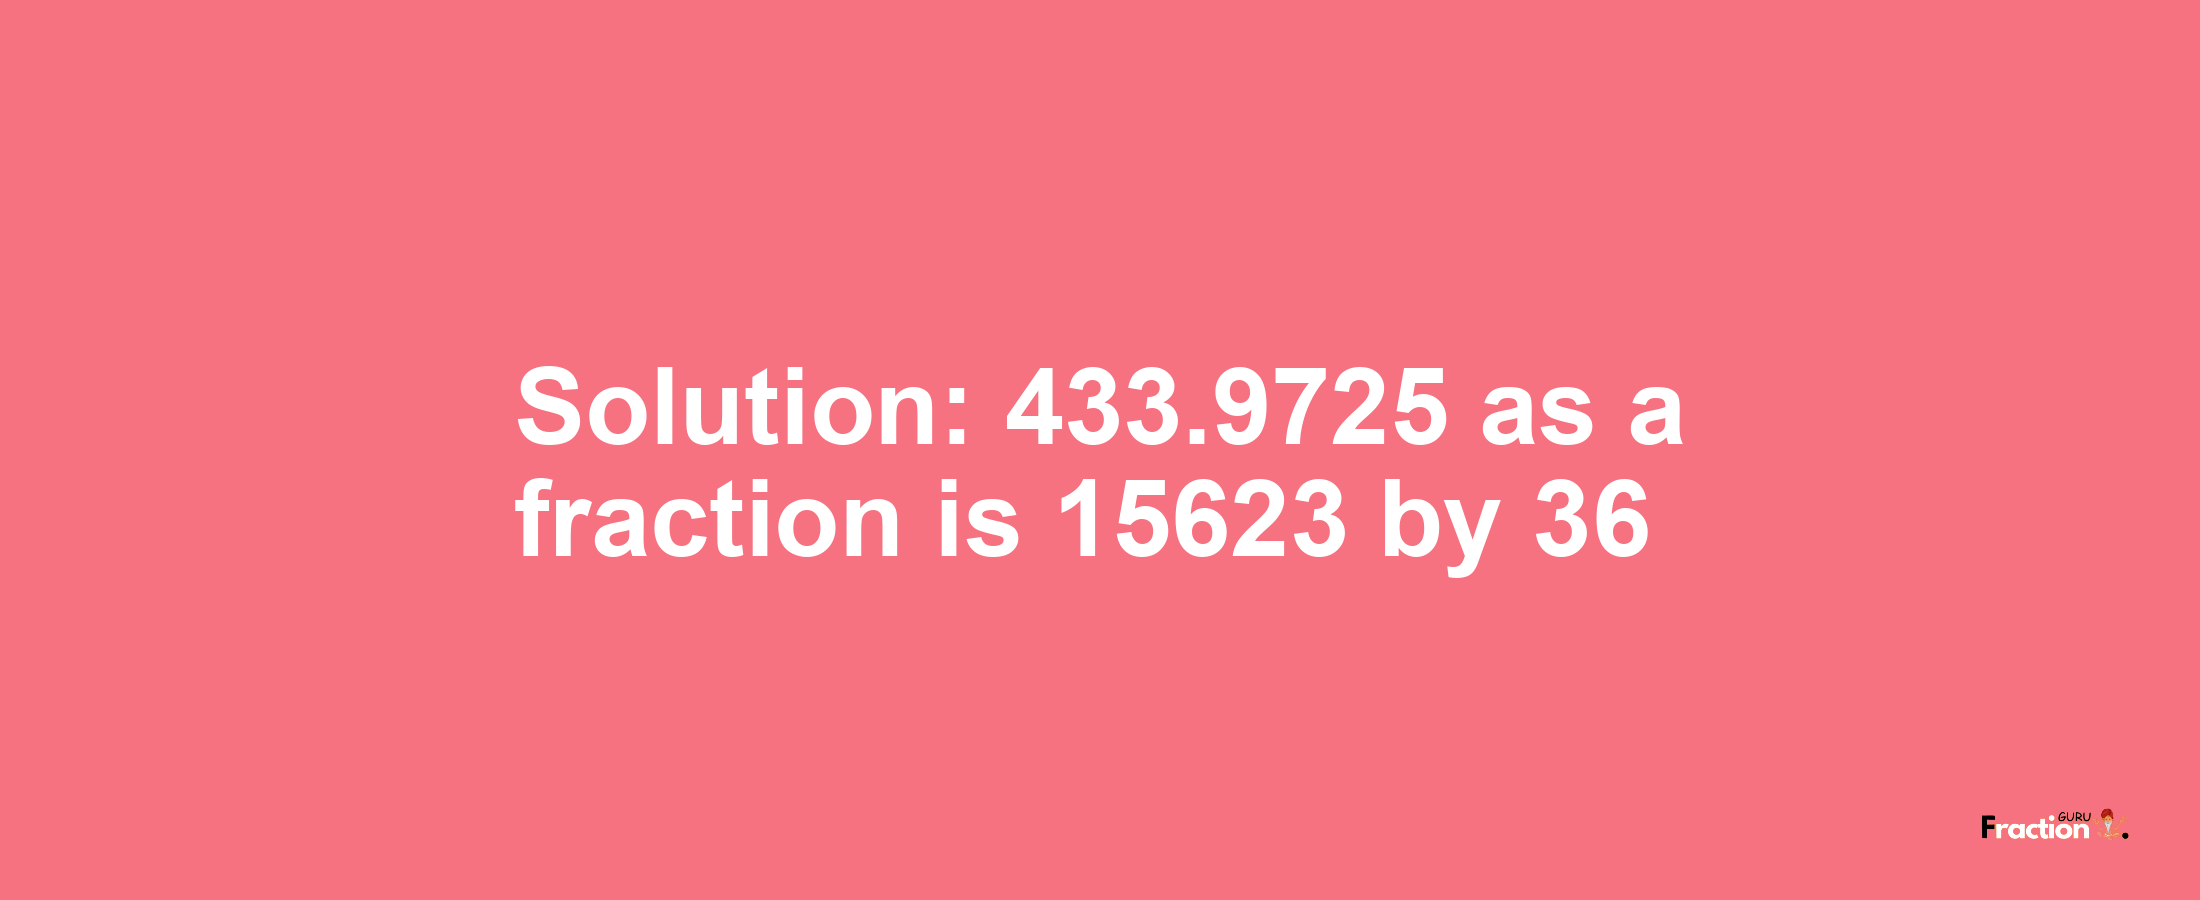 Solution:433.9725 as a fraction is 15623/36